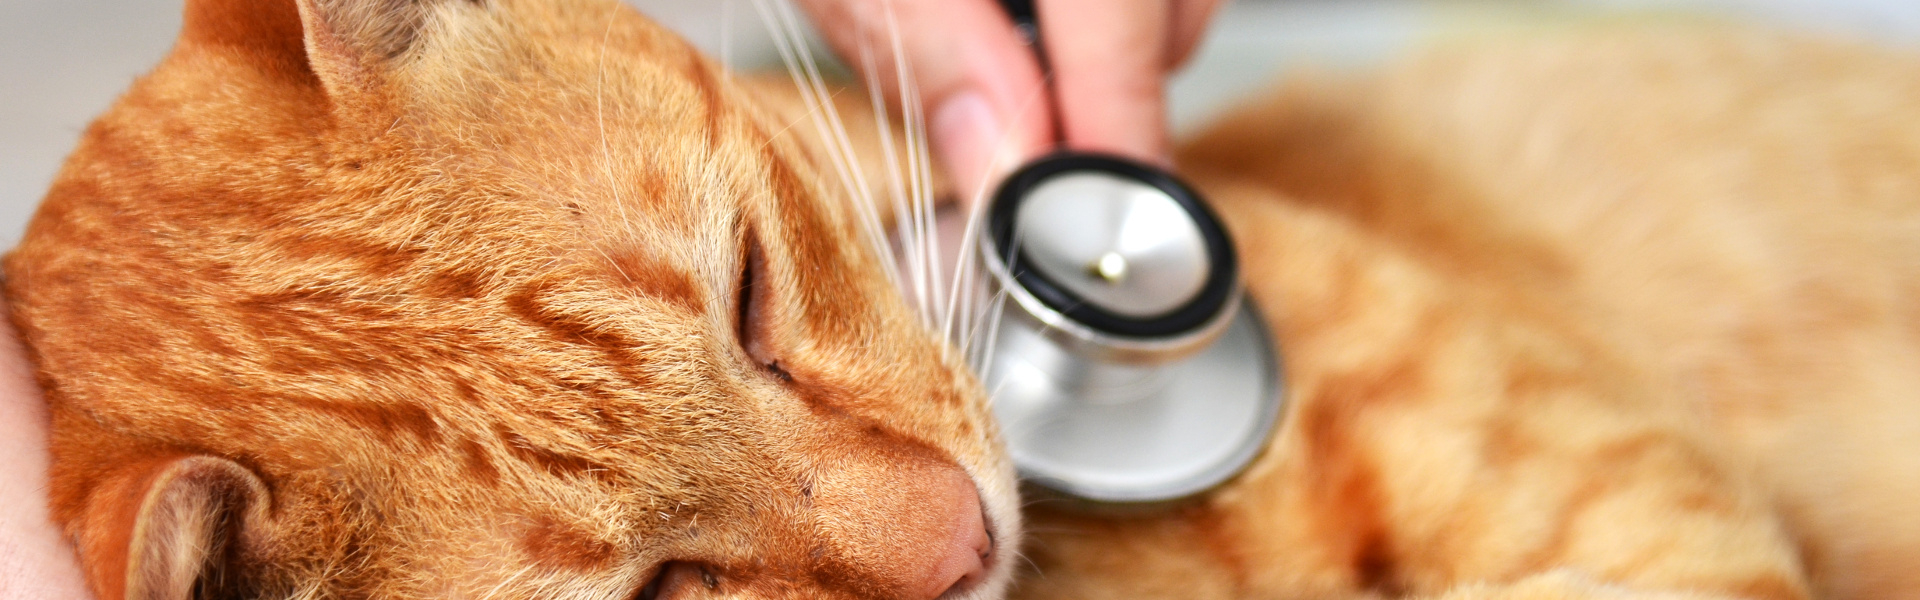 After Hours Vet - Accident & Emergency | Veterinary Specialists Aotearoa